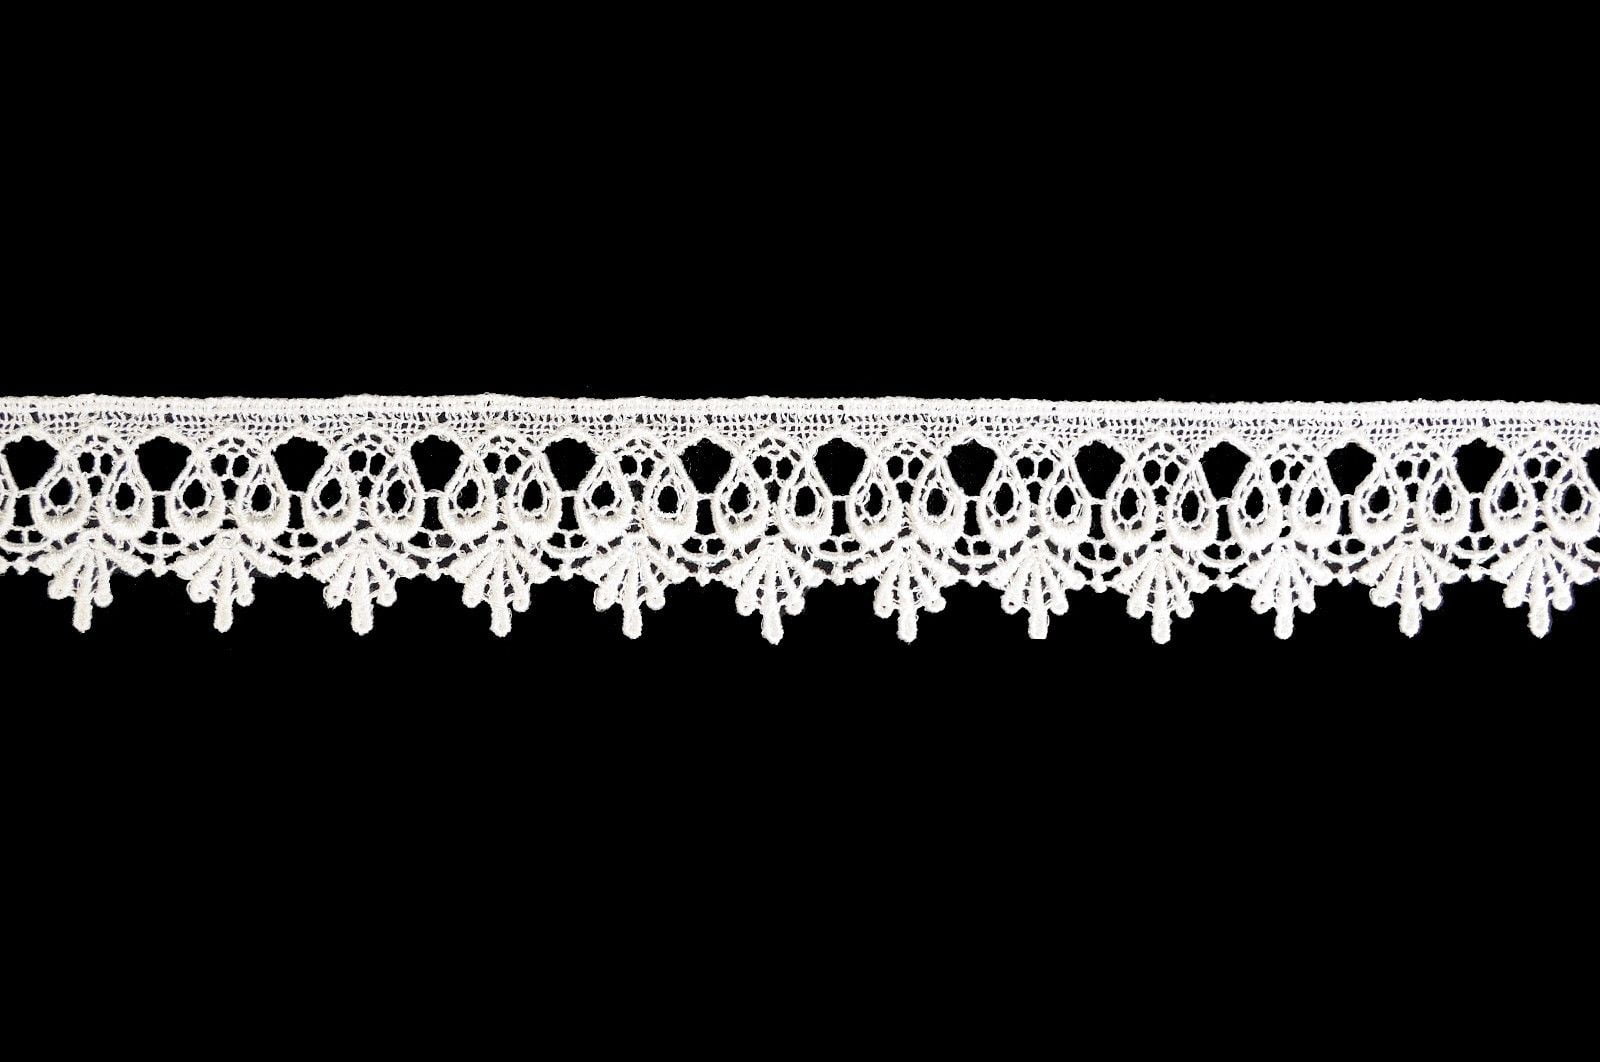 Lily 1" White Ruffled Gathered Raschel Lace Trim Sewing Notion DIY Wholesale Lot